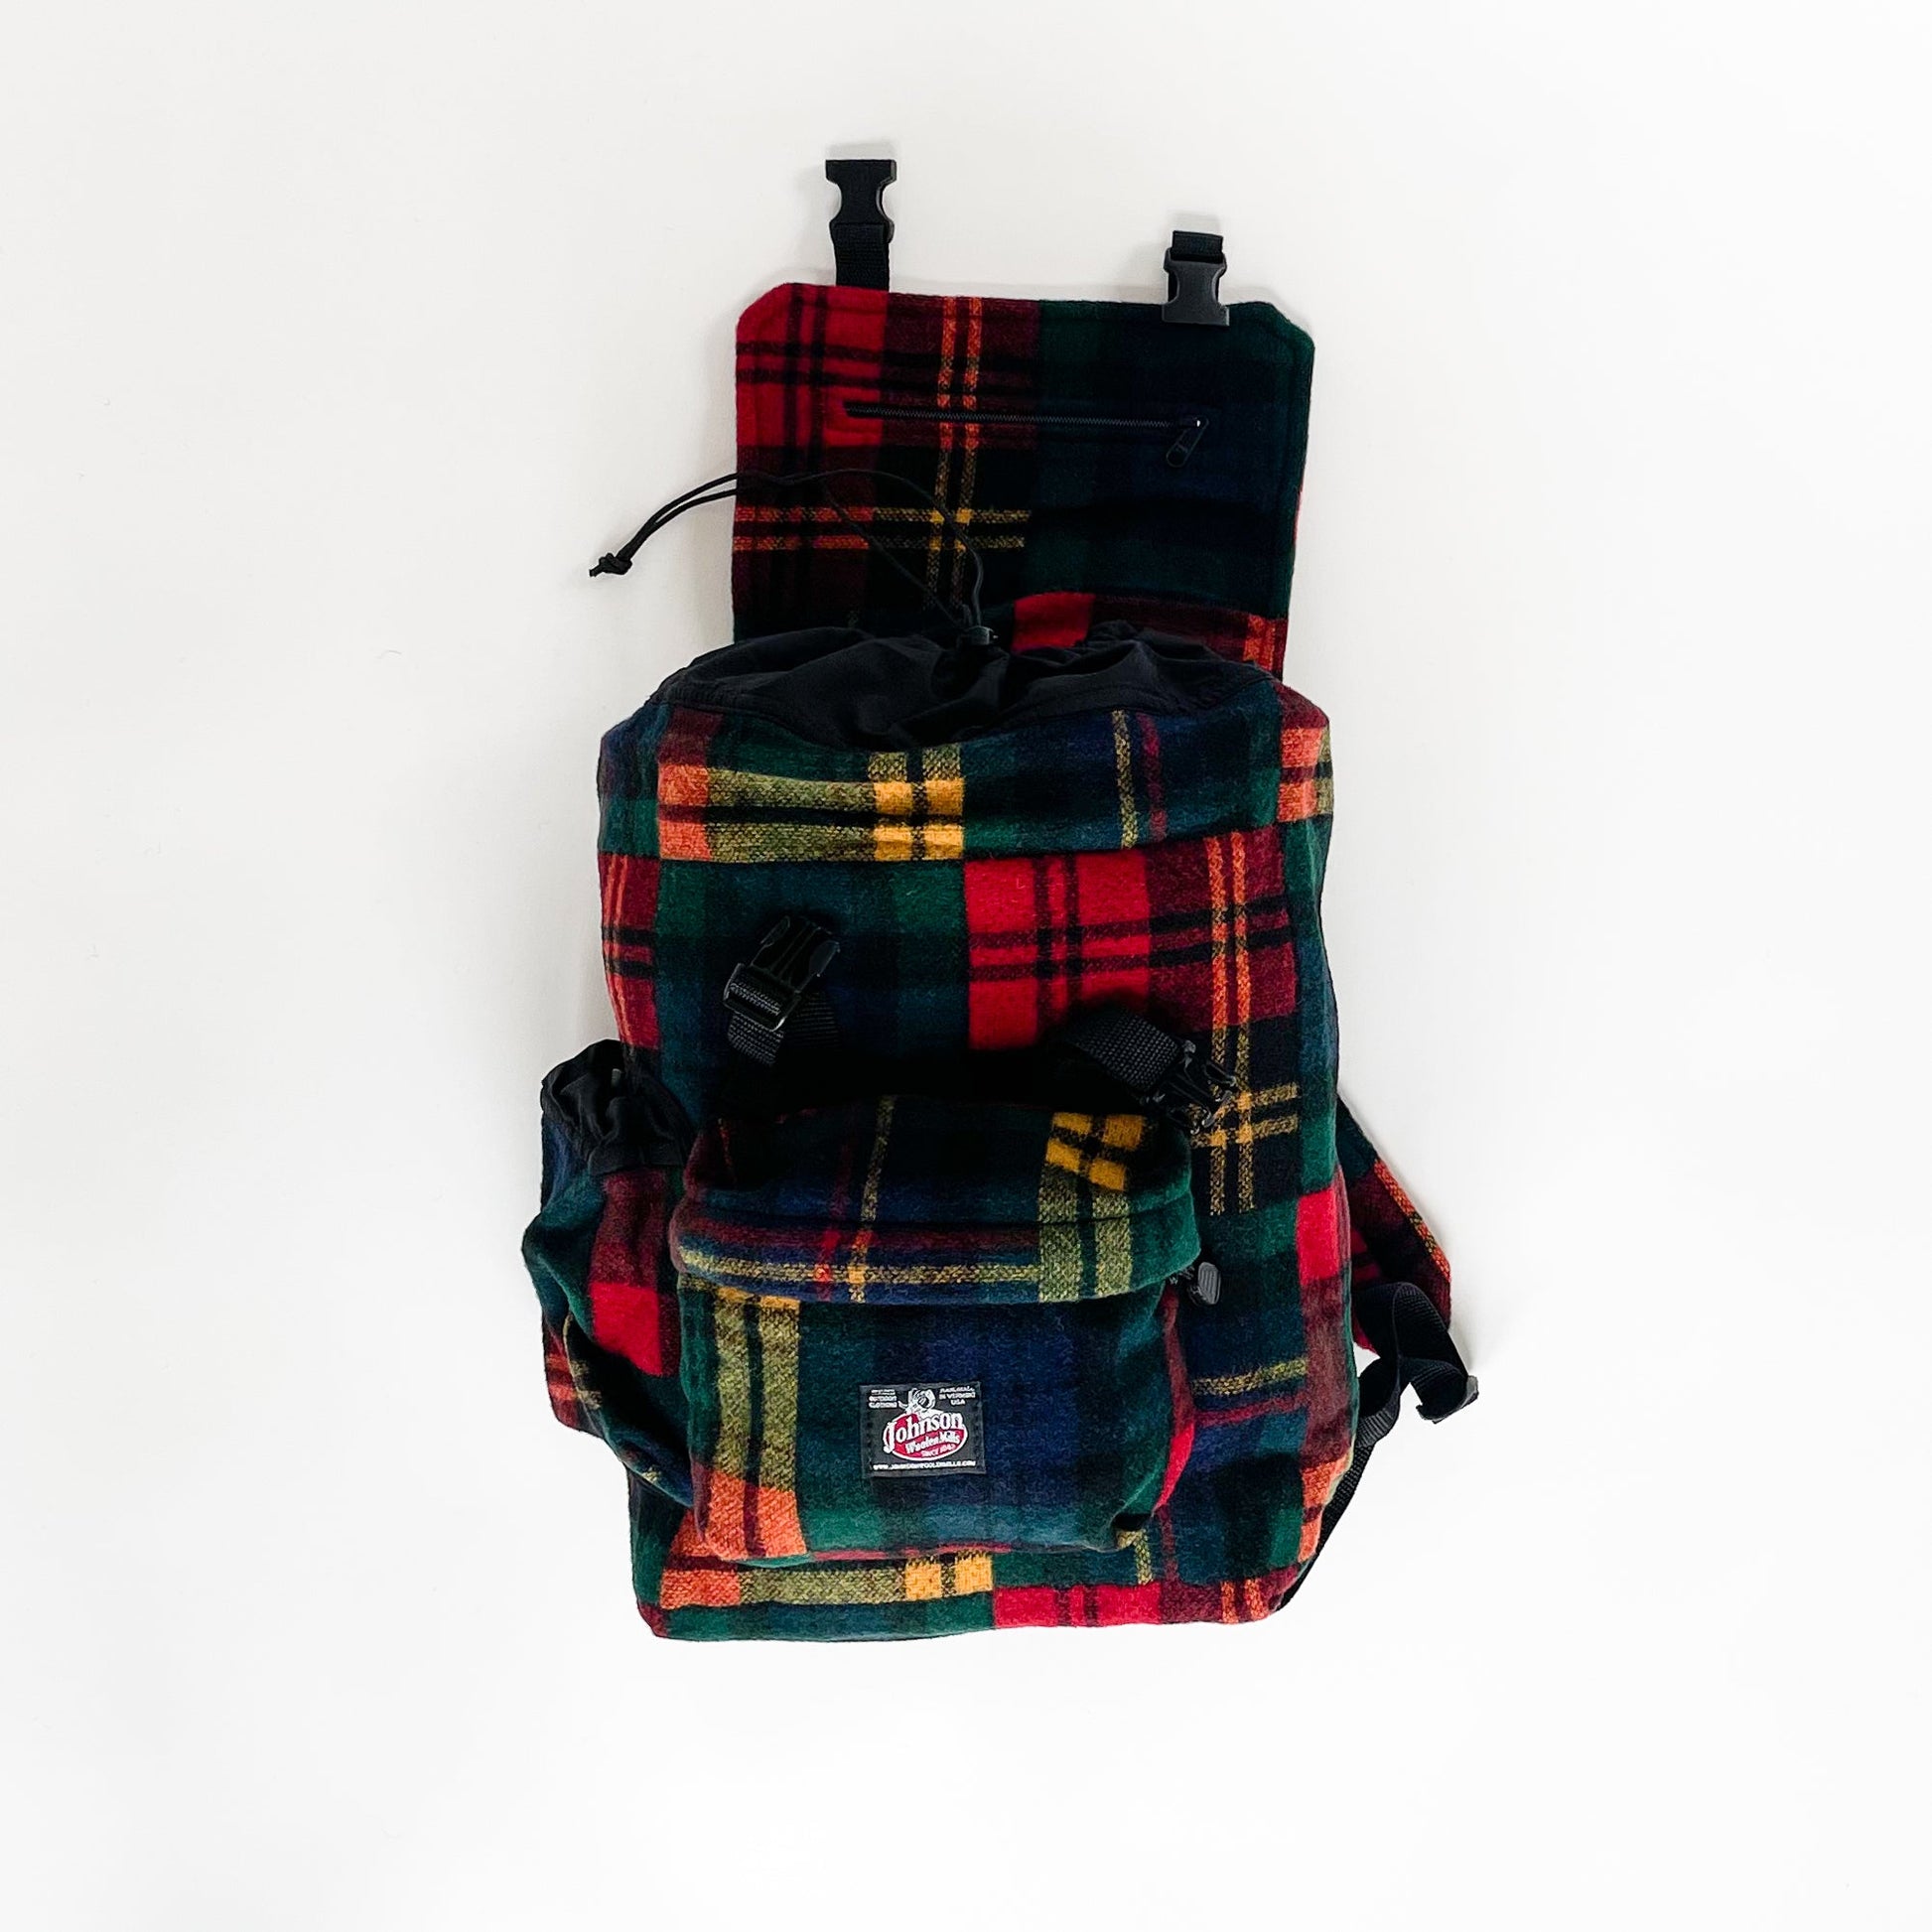 Wool back in multi color plaid - front view with top flap open